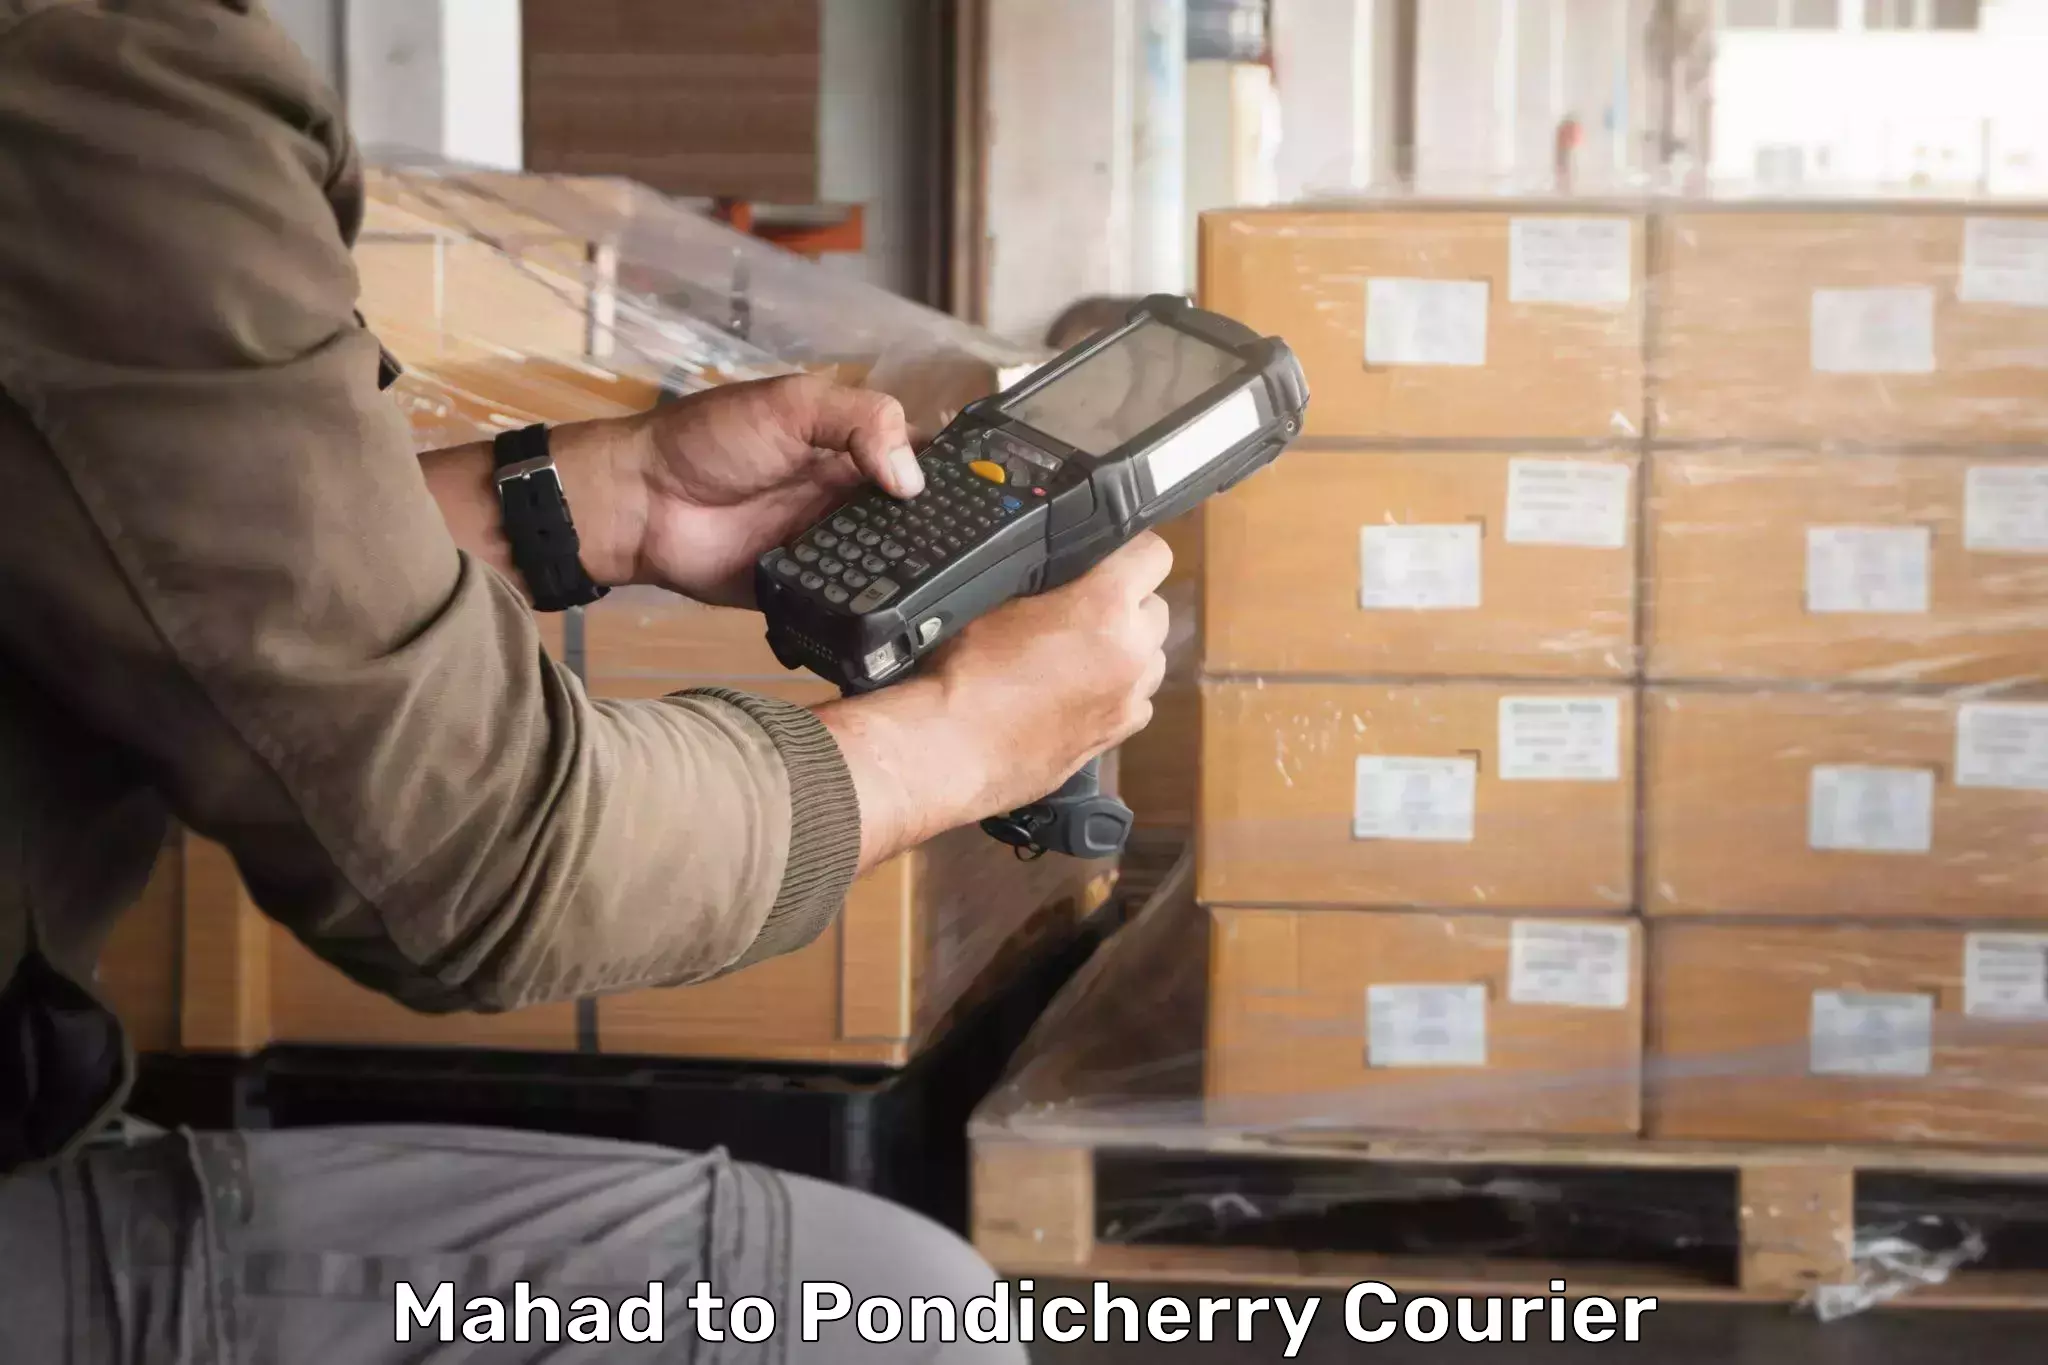 Business delivery service Mahad to Pondicherry